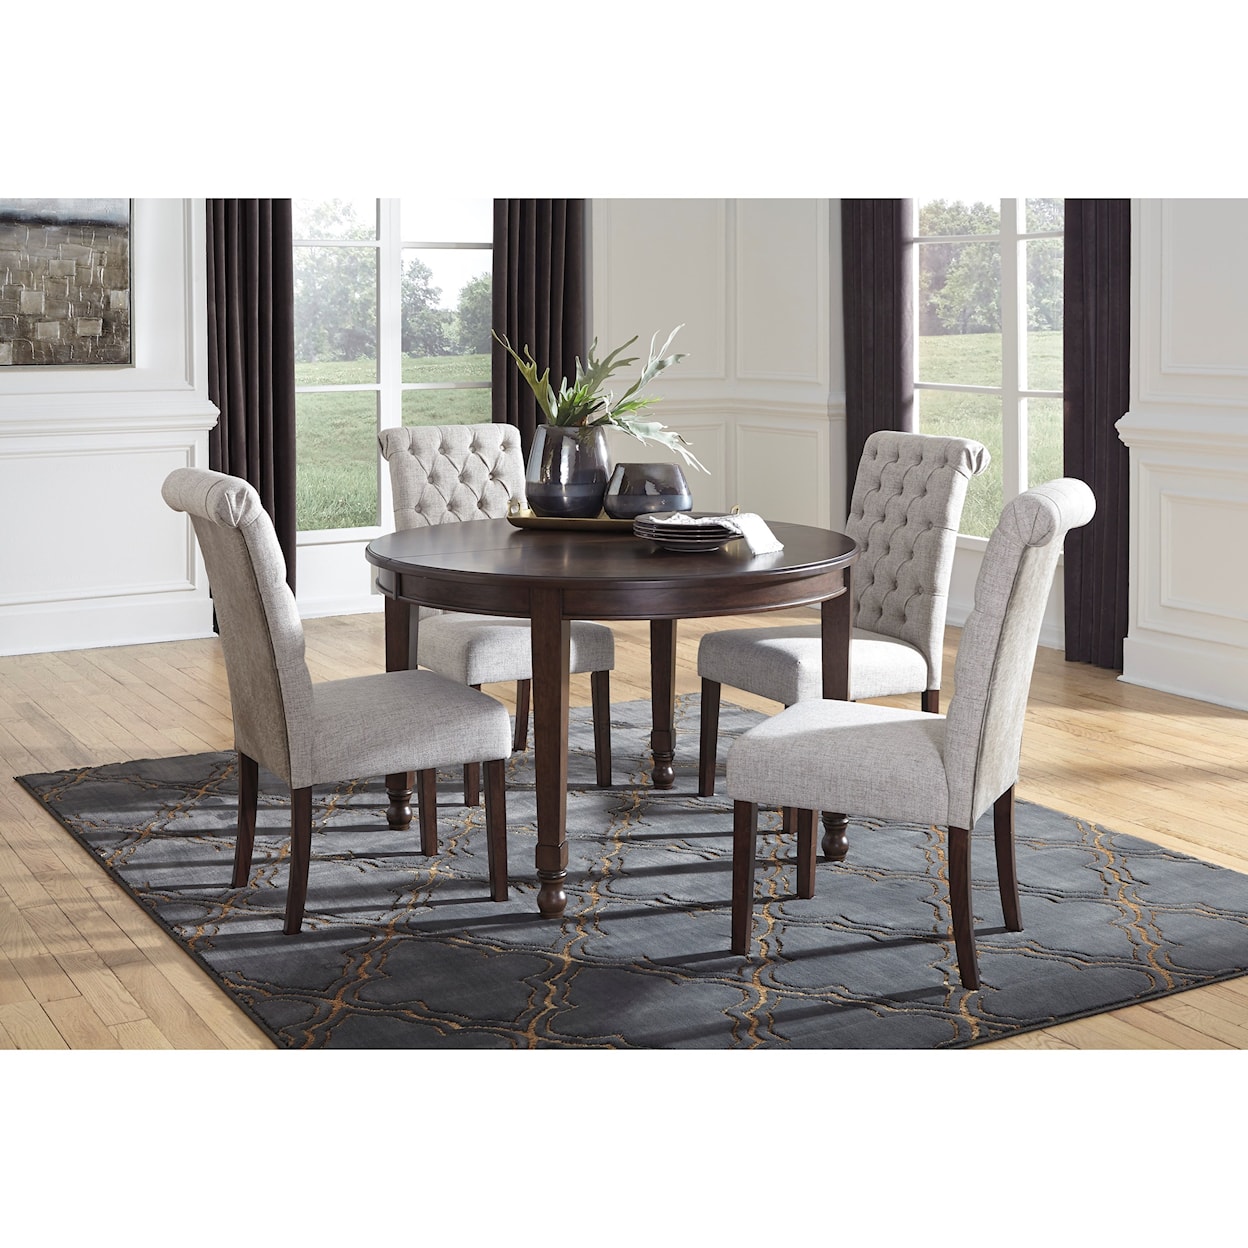 Signature Design by Ashley Adinton 5-Piece Table and Chair Set